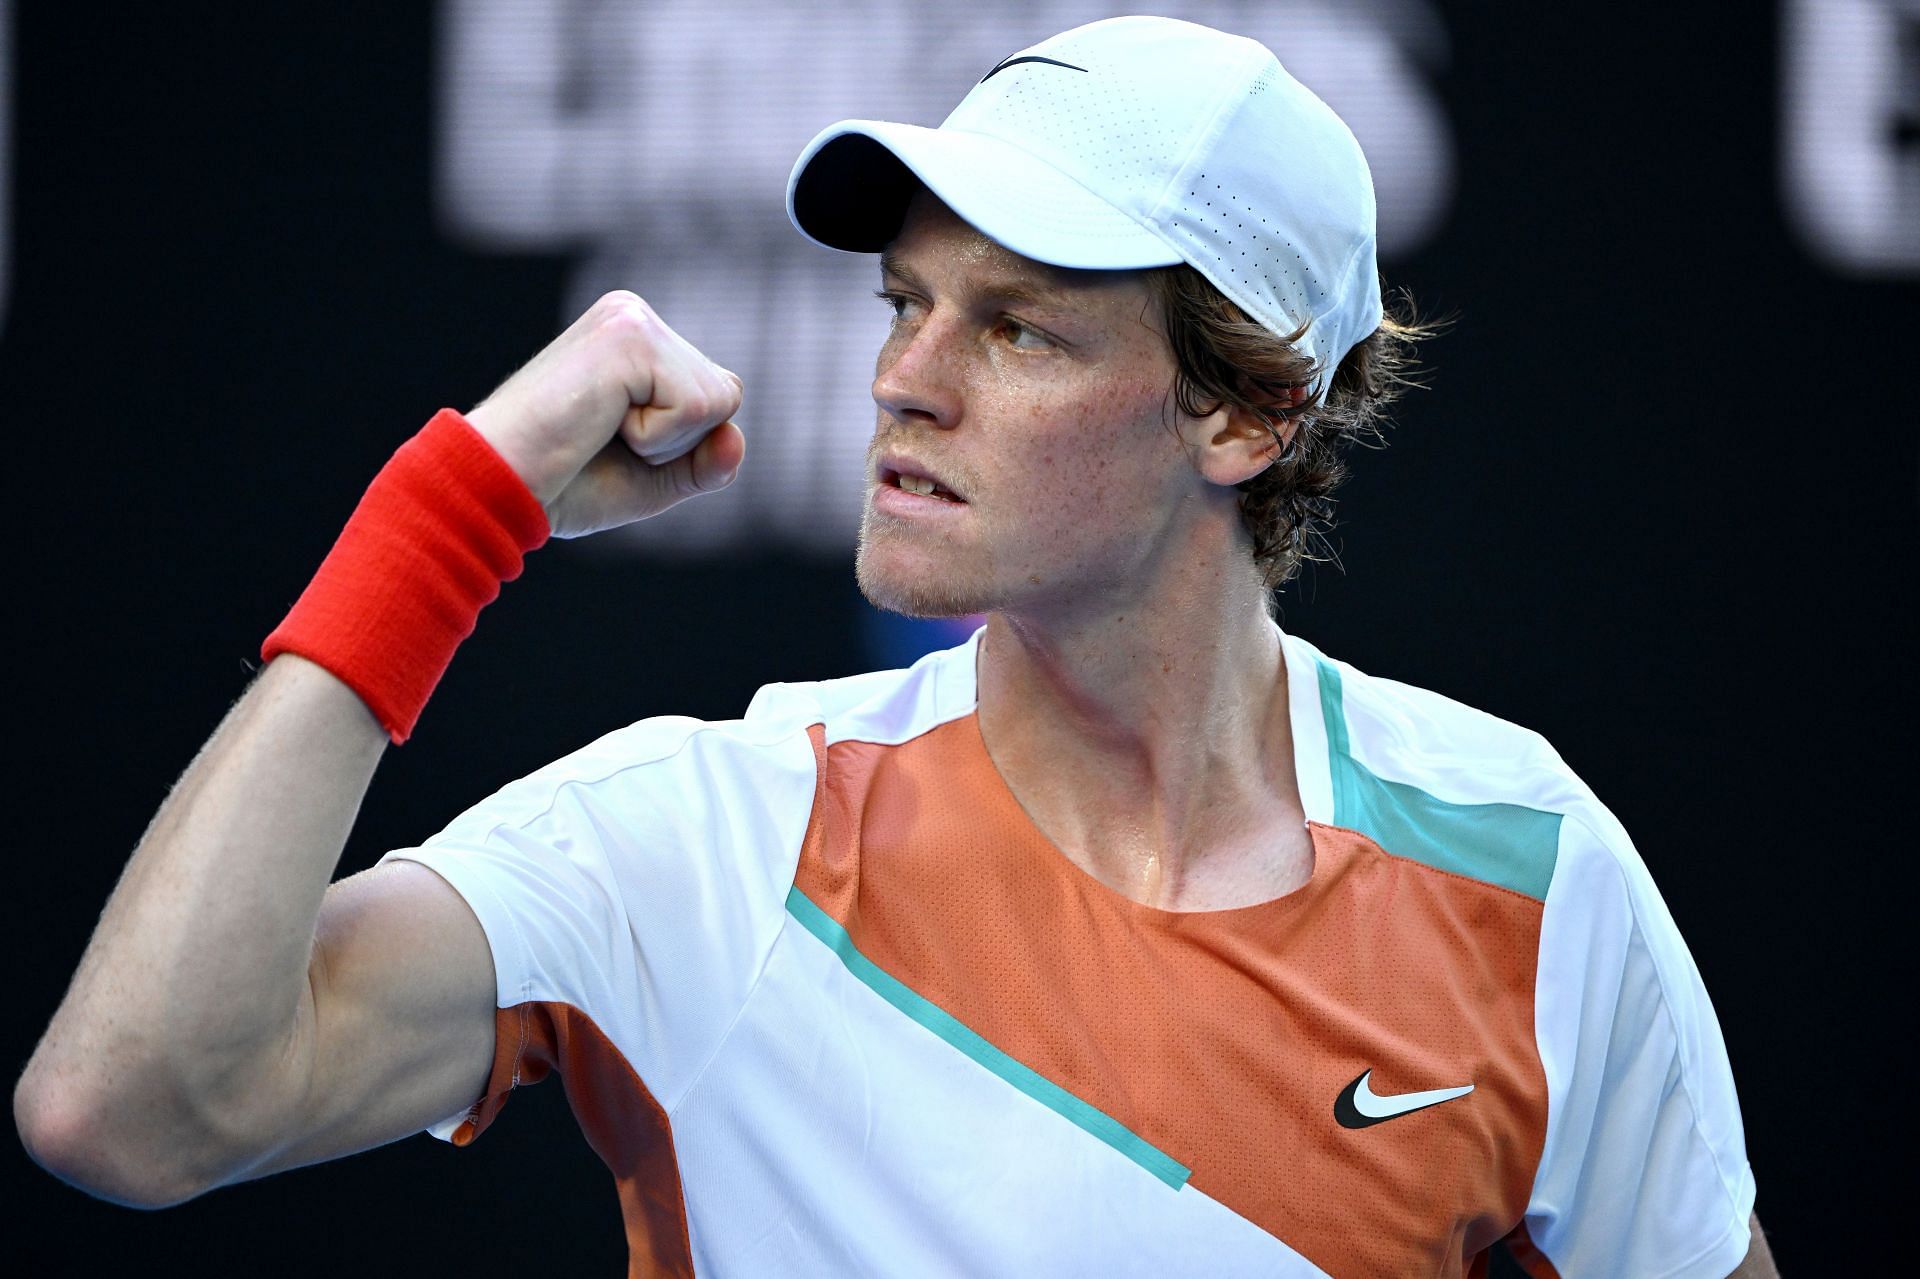 Jannik Sinner will be aiming to reach the last eight of the Indian Wells Masters